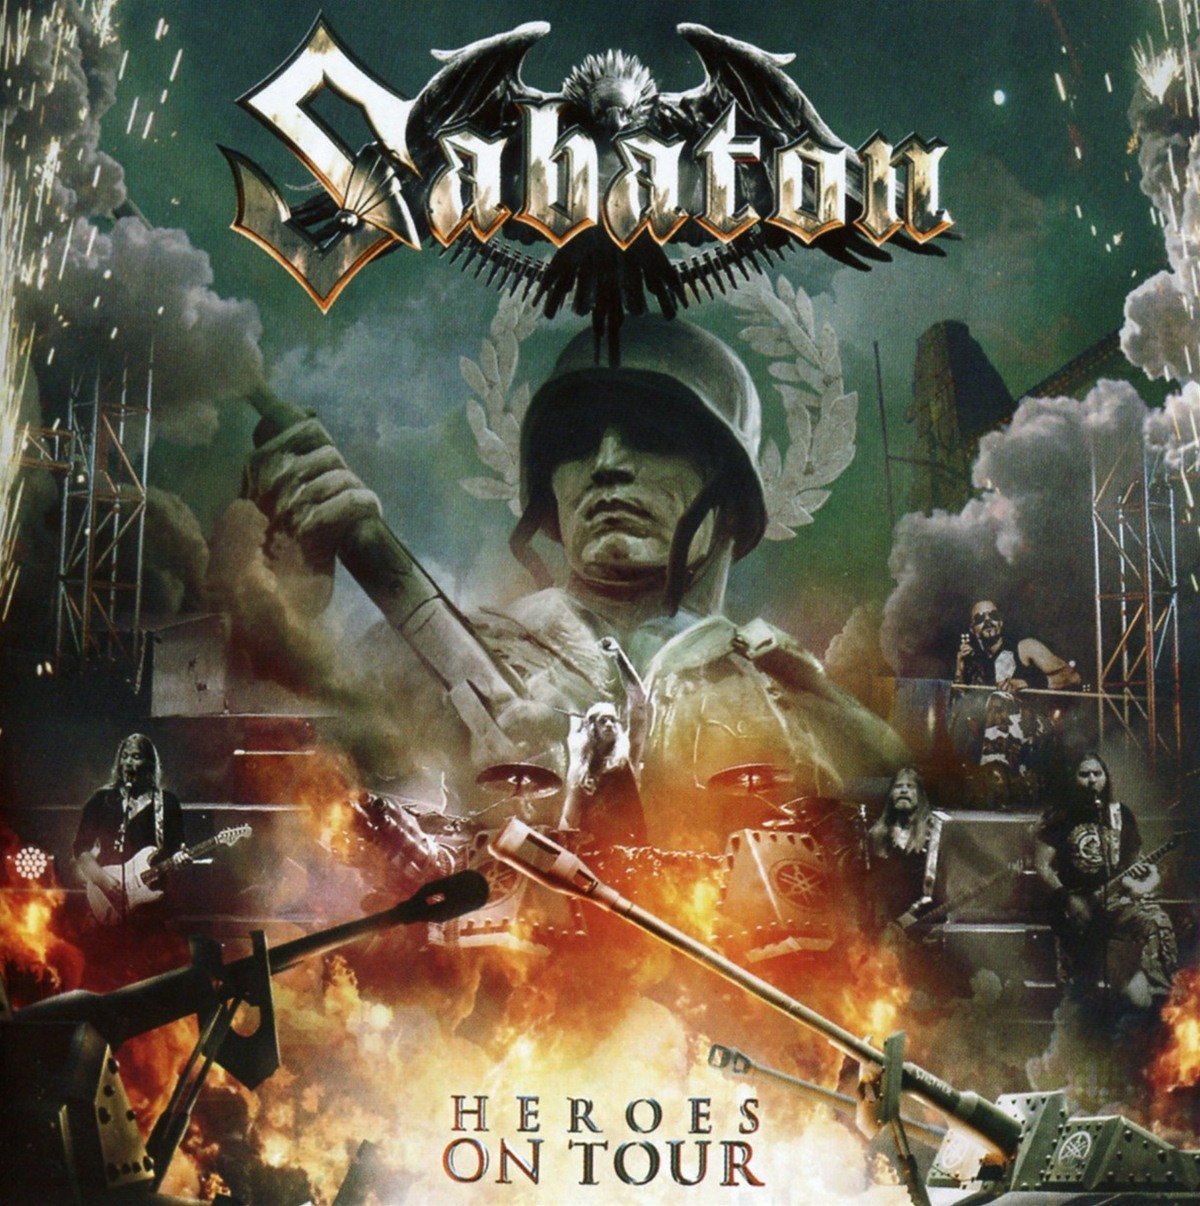 Sabaton: Heroes on Tour (2016) Book Cover